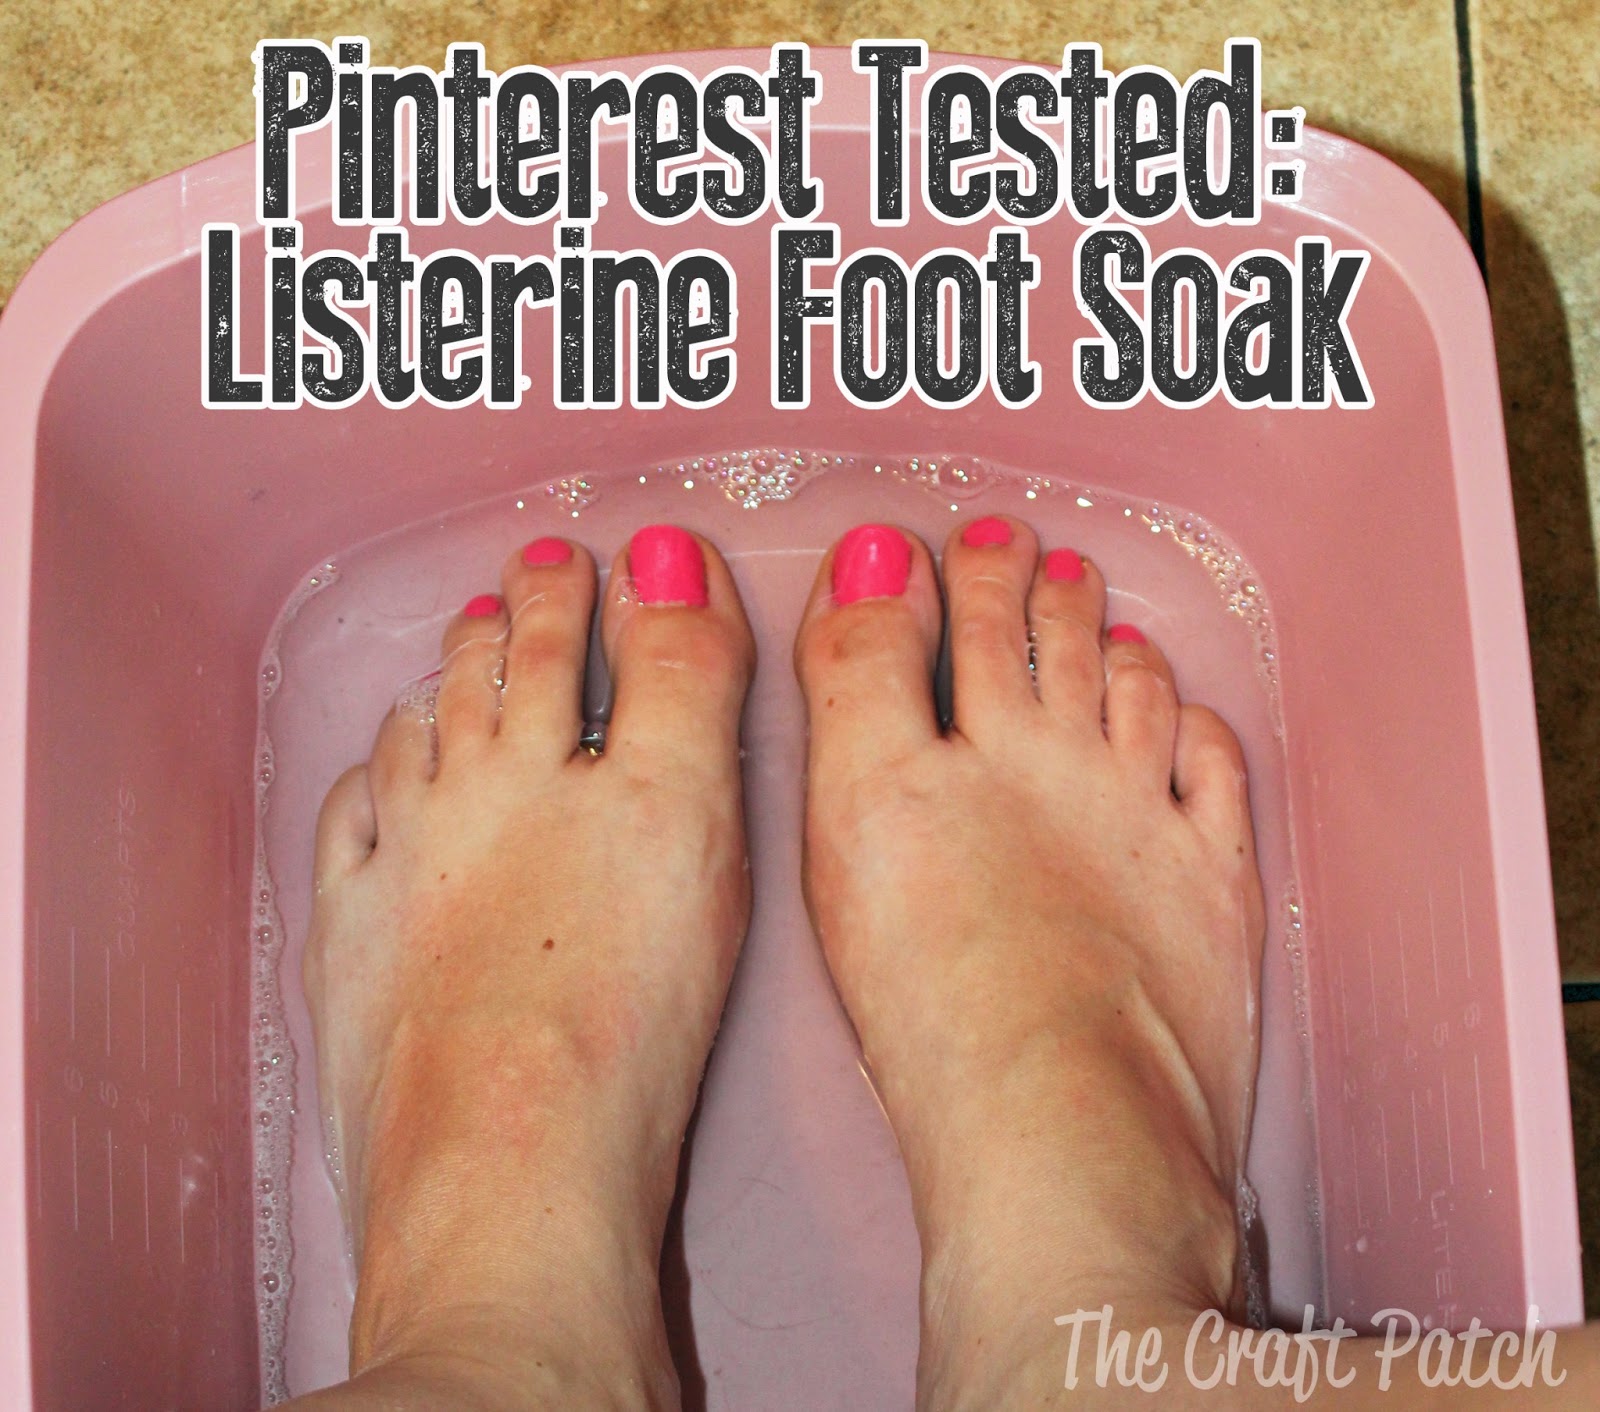 The Craft Patch Listerine Foot Soak